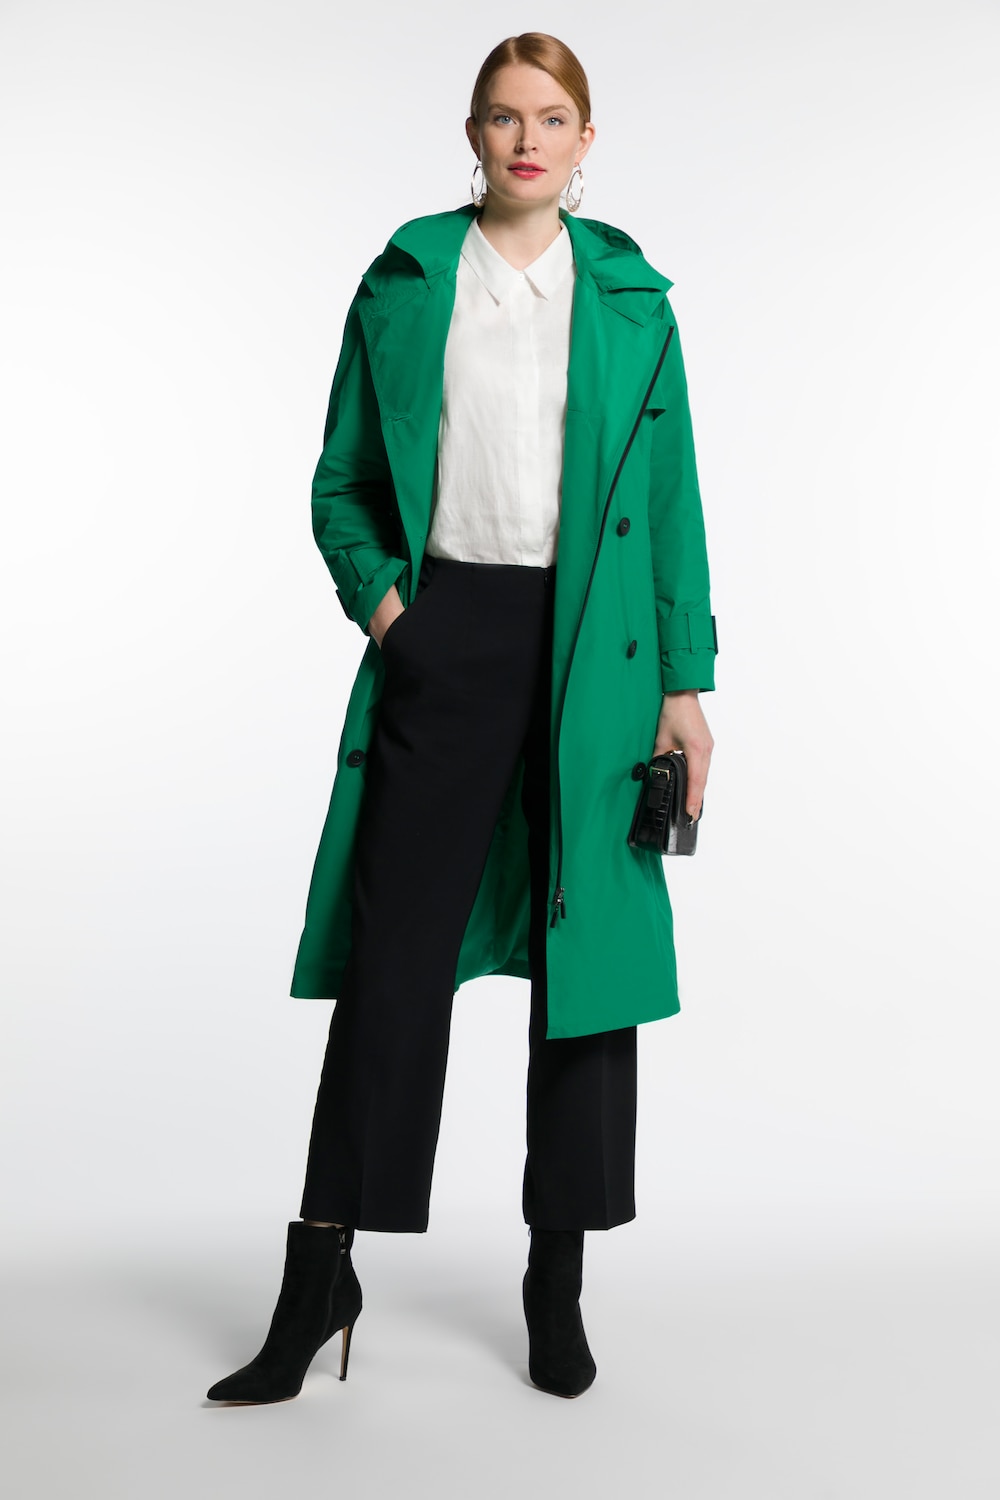 Plus Size Double Breasted Zippered Sides Hooded Fully Lined Trench Coat, Woman, green, size: 16/18, polyester, Ulla Popken